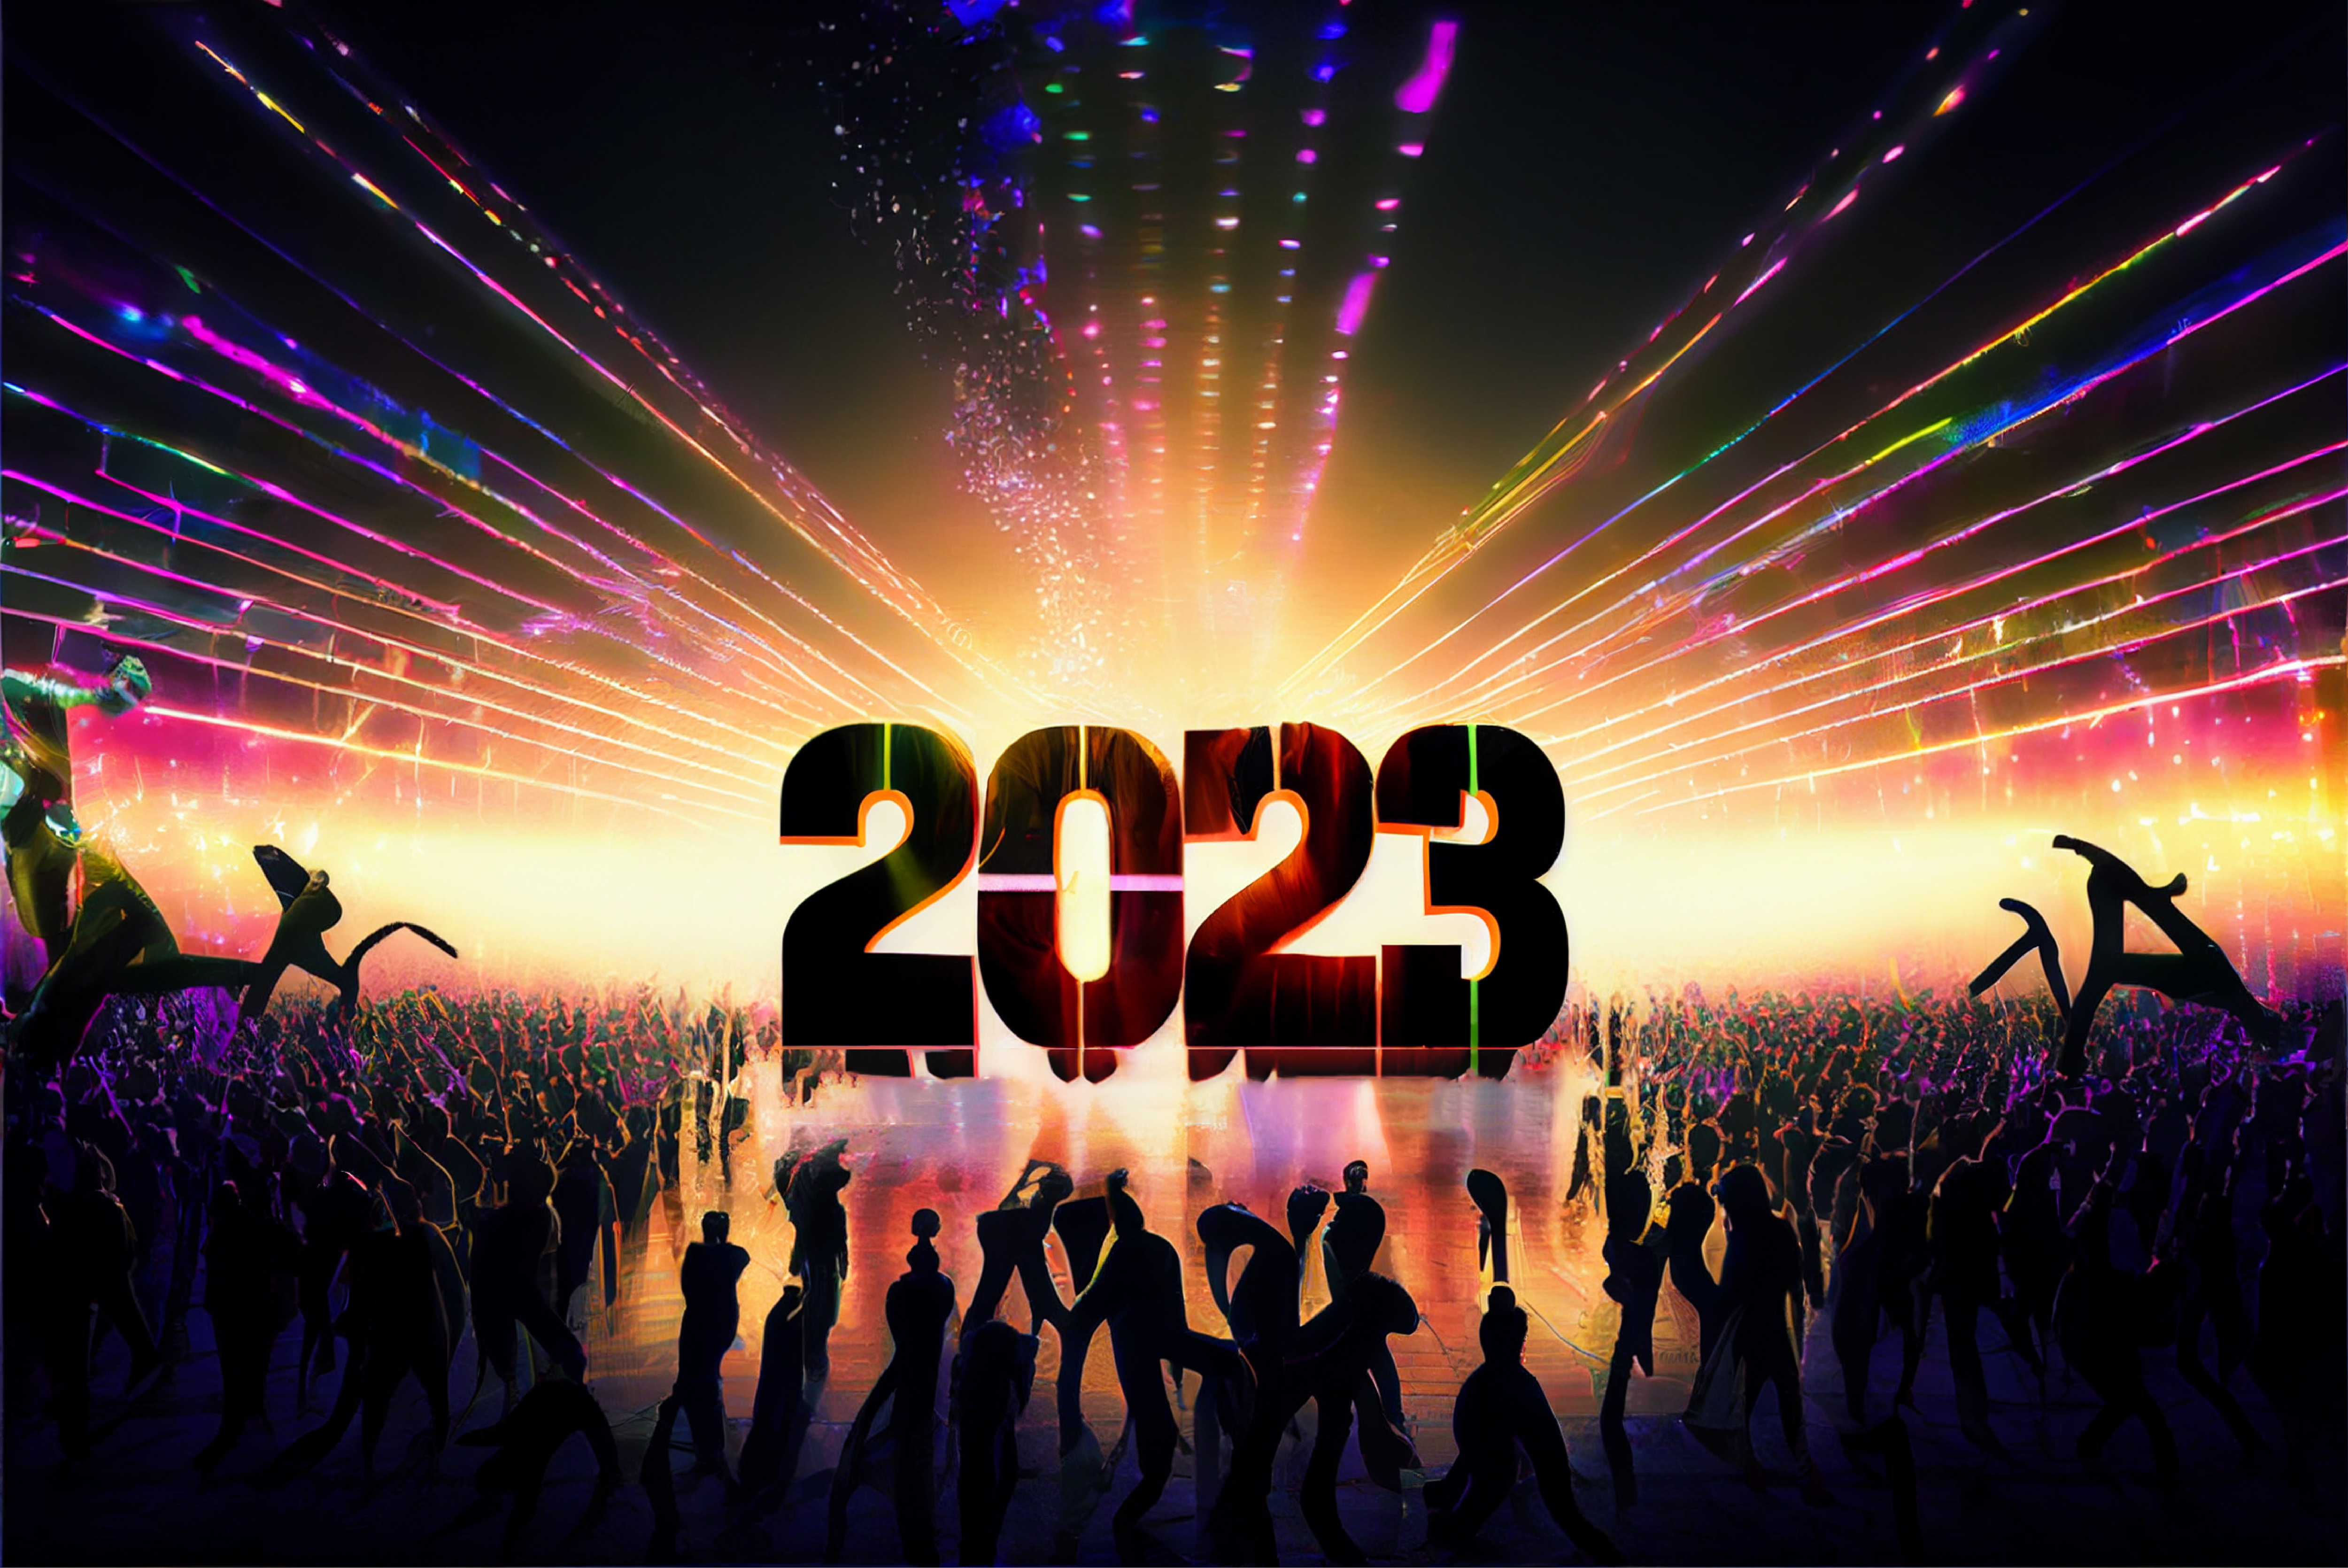 Free Music Dance Party Background Happy New Year Background 2023